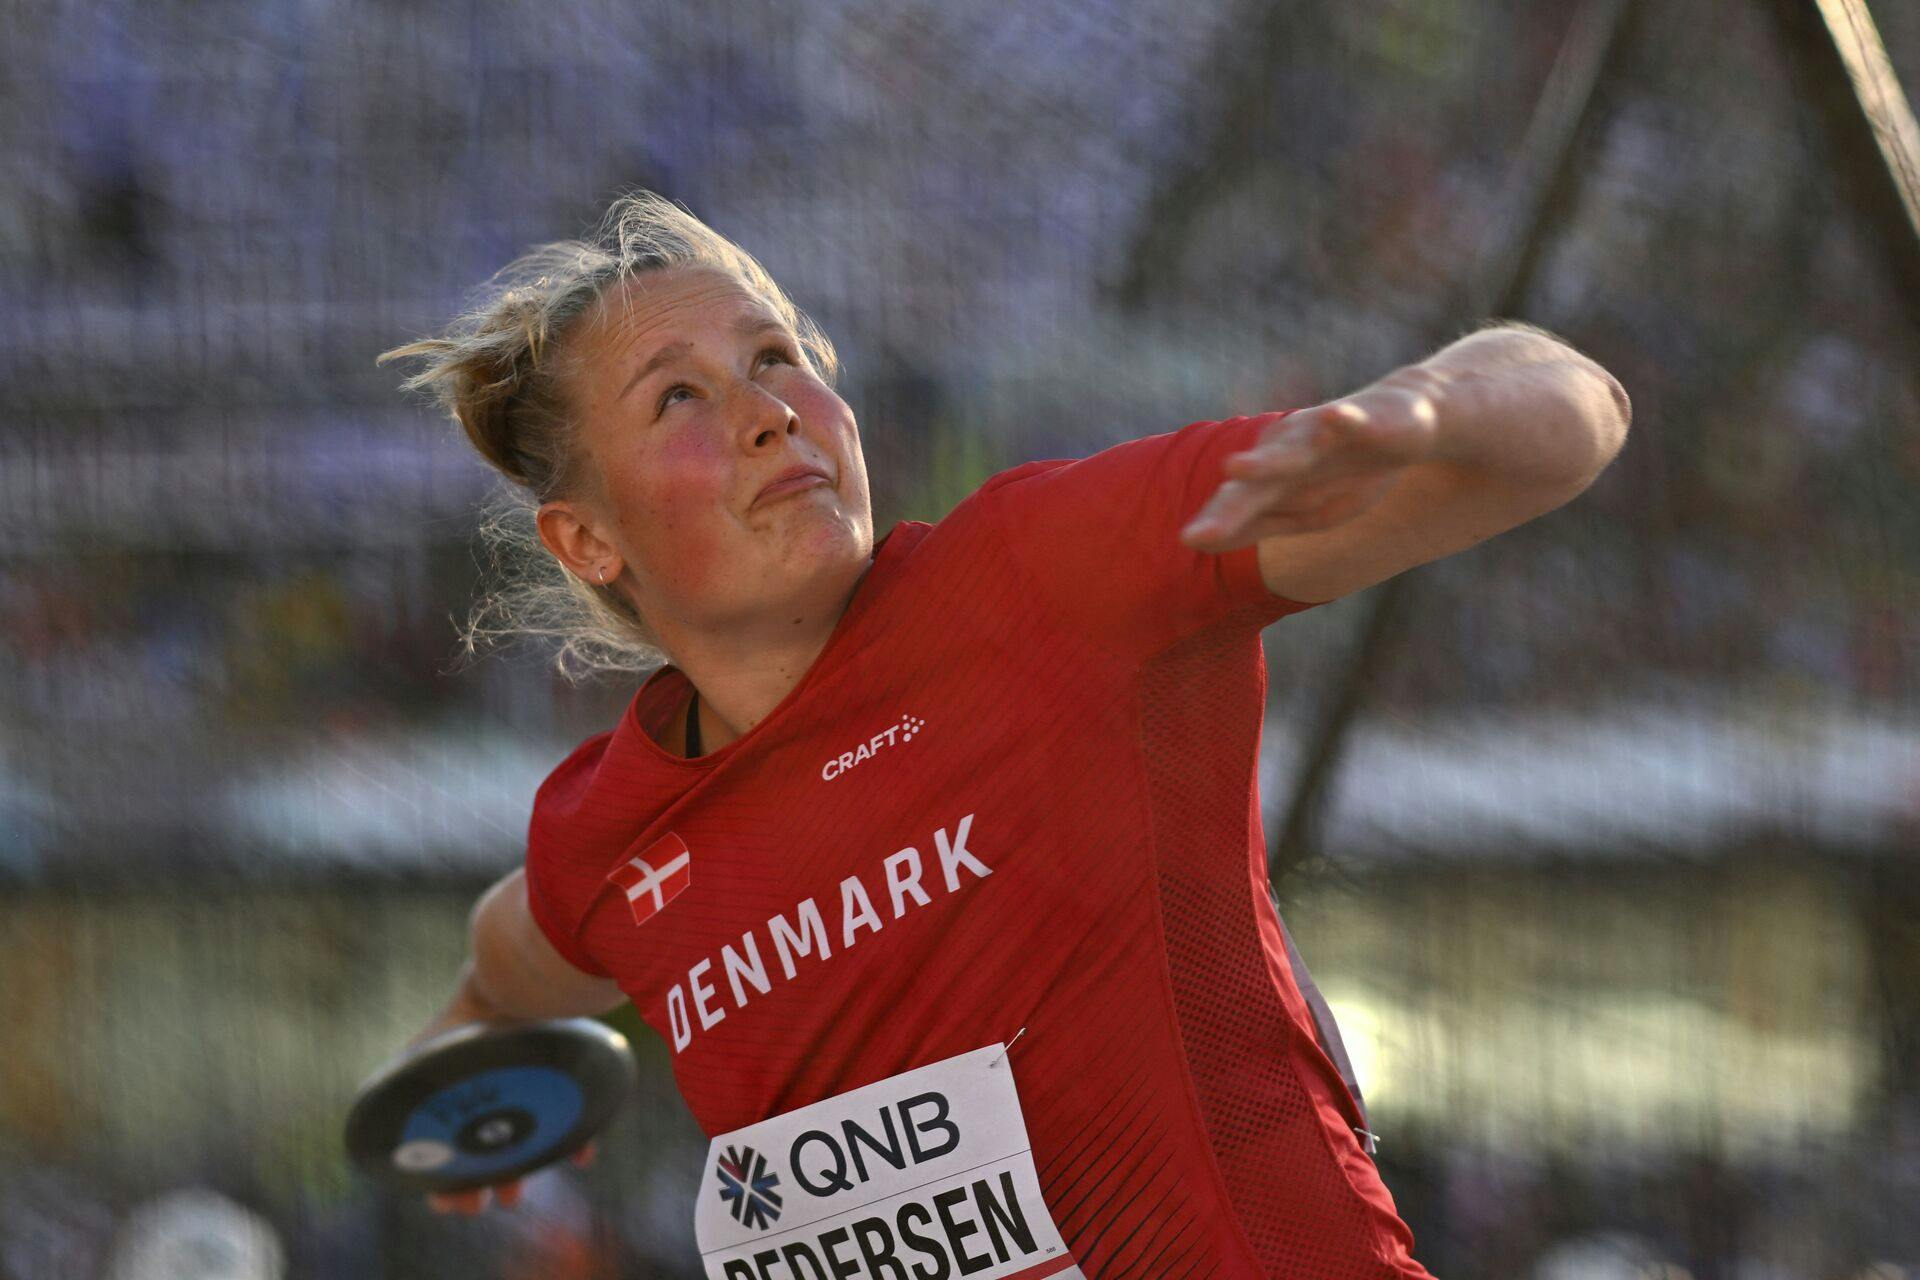 Denmark's Lisa Brix Pedersen competes in the women's discus throw qualification during the World Athletics Championships at Hayward Field in Eugene, Oregon on July 18, 2022. (Photo by ANDREJ ISAKOVIC / AFP)